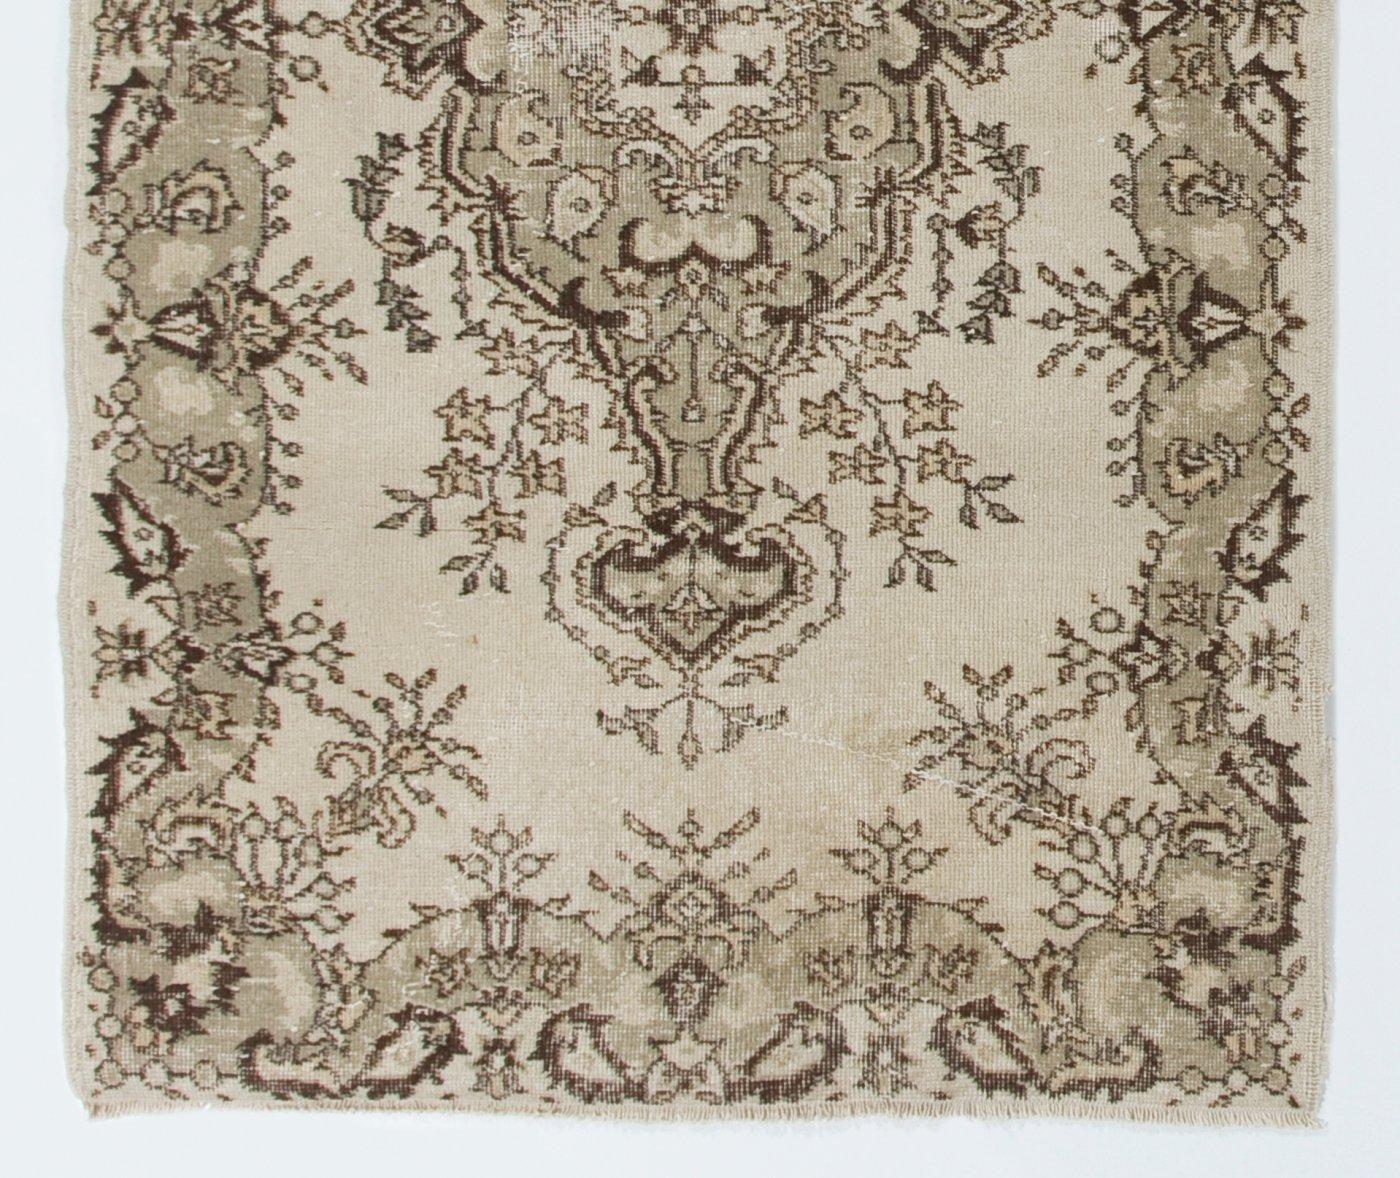 Rustic  4x7 ft Vintage Turkish Accent Rug in Beige. Sun Faded Handmade Carpet